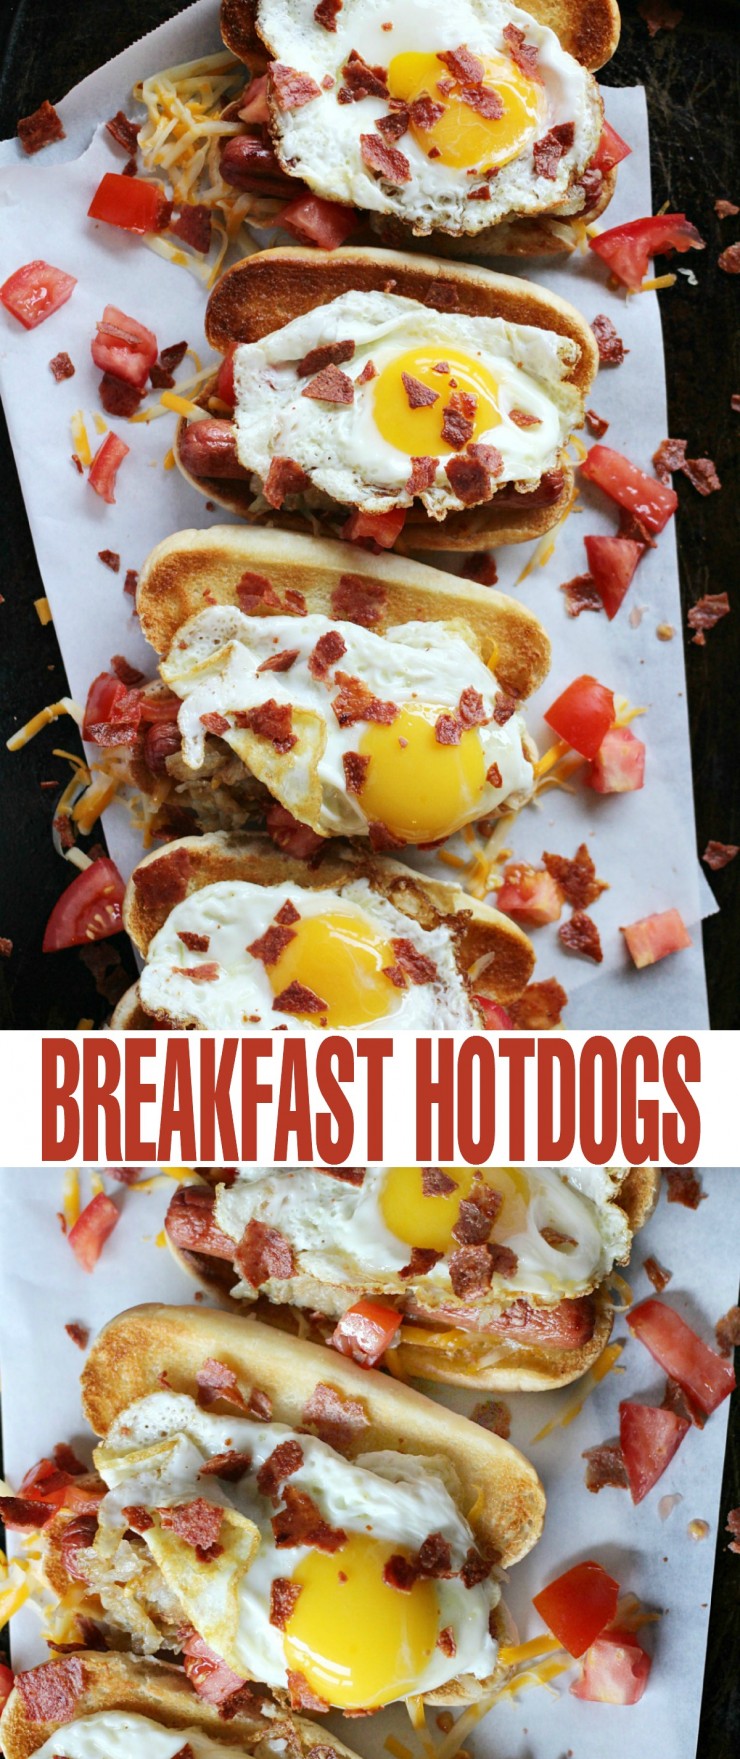 The Ultimate Breakfast Hotdog is a fully loaded hotdog with ingredients that makes it perfect for breakfast, brunch, lunch and even dinner.